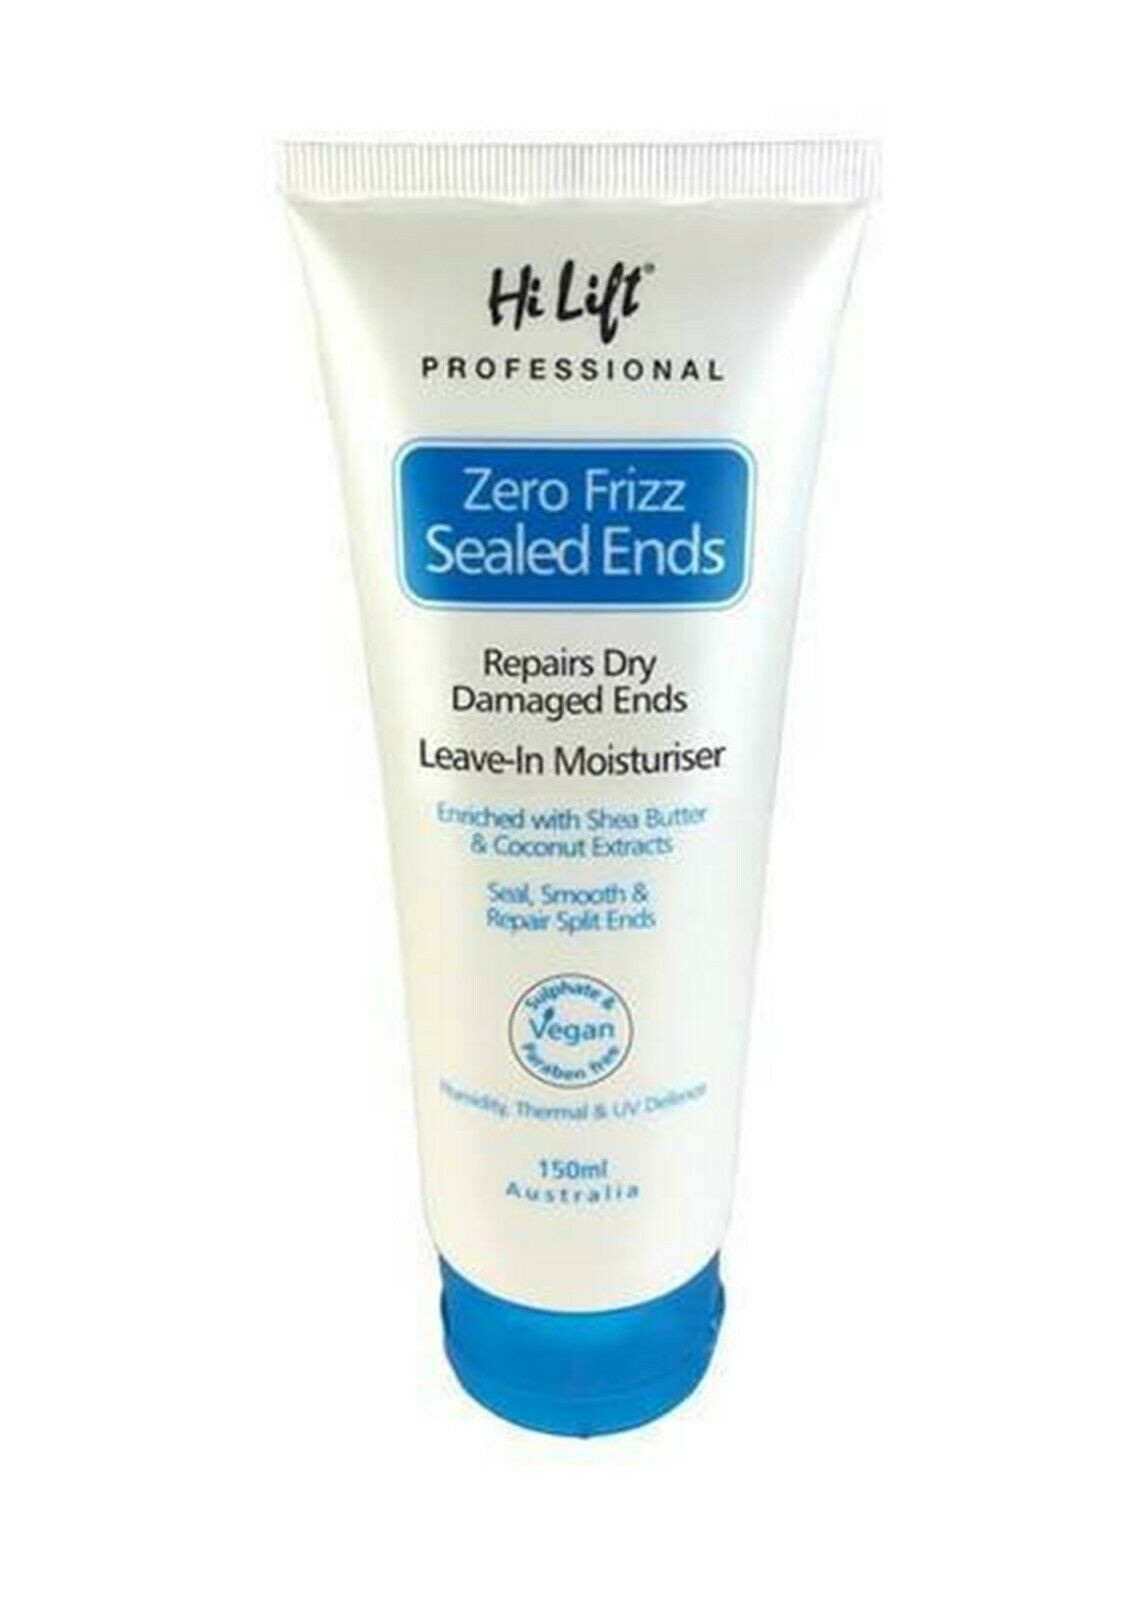 iaahhaircare,HI LIFT Zero Frizz Sealed ends 150ml,Shampoos & Conditioners,HI LIFT